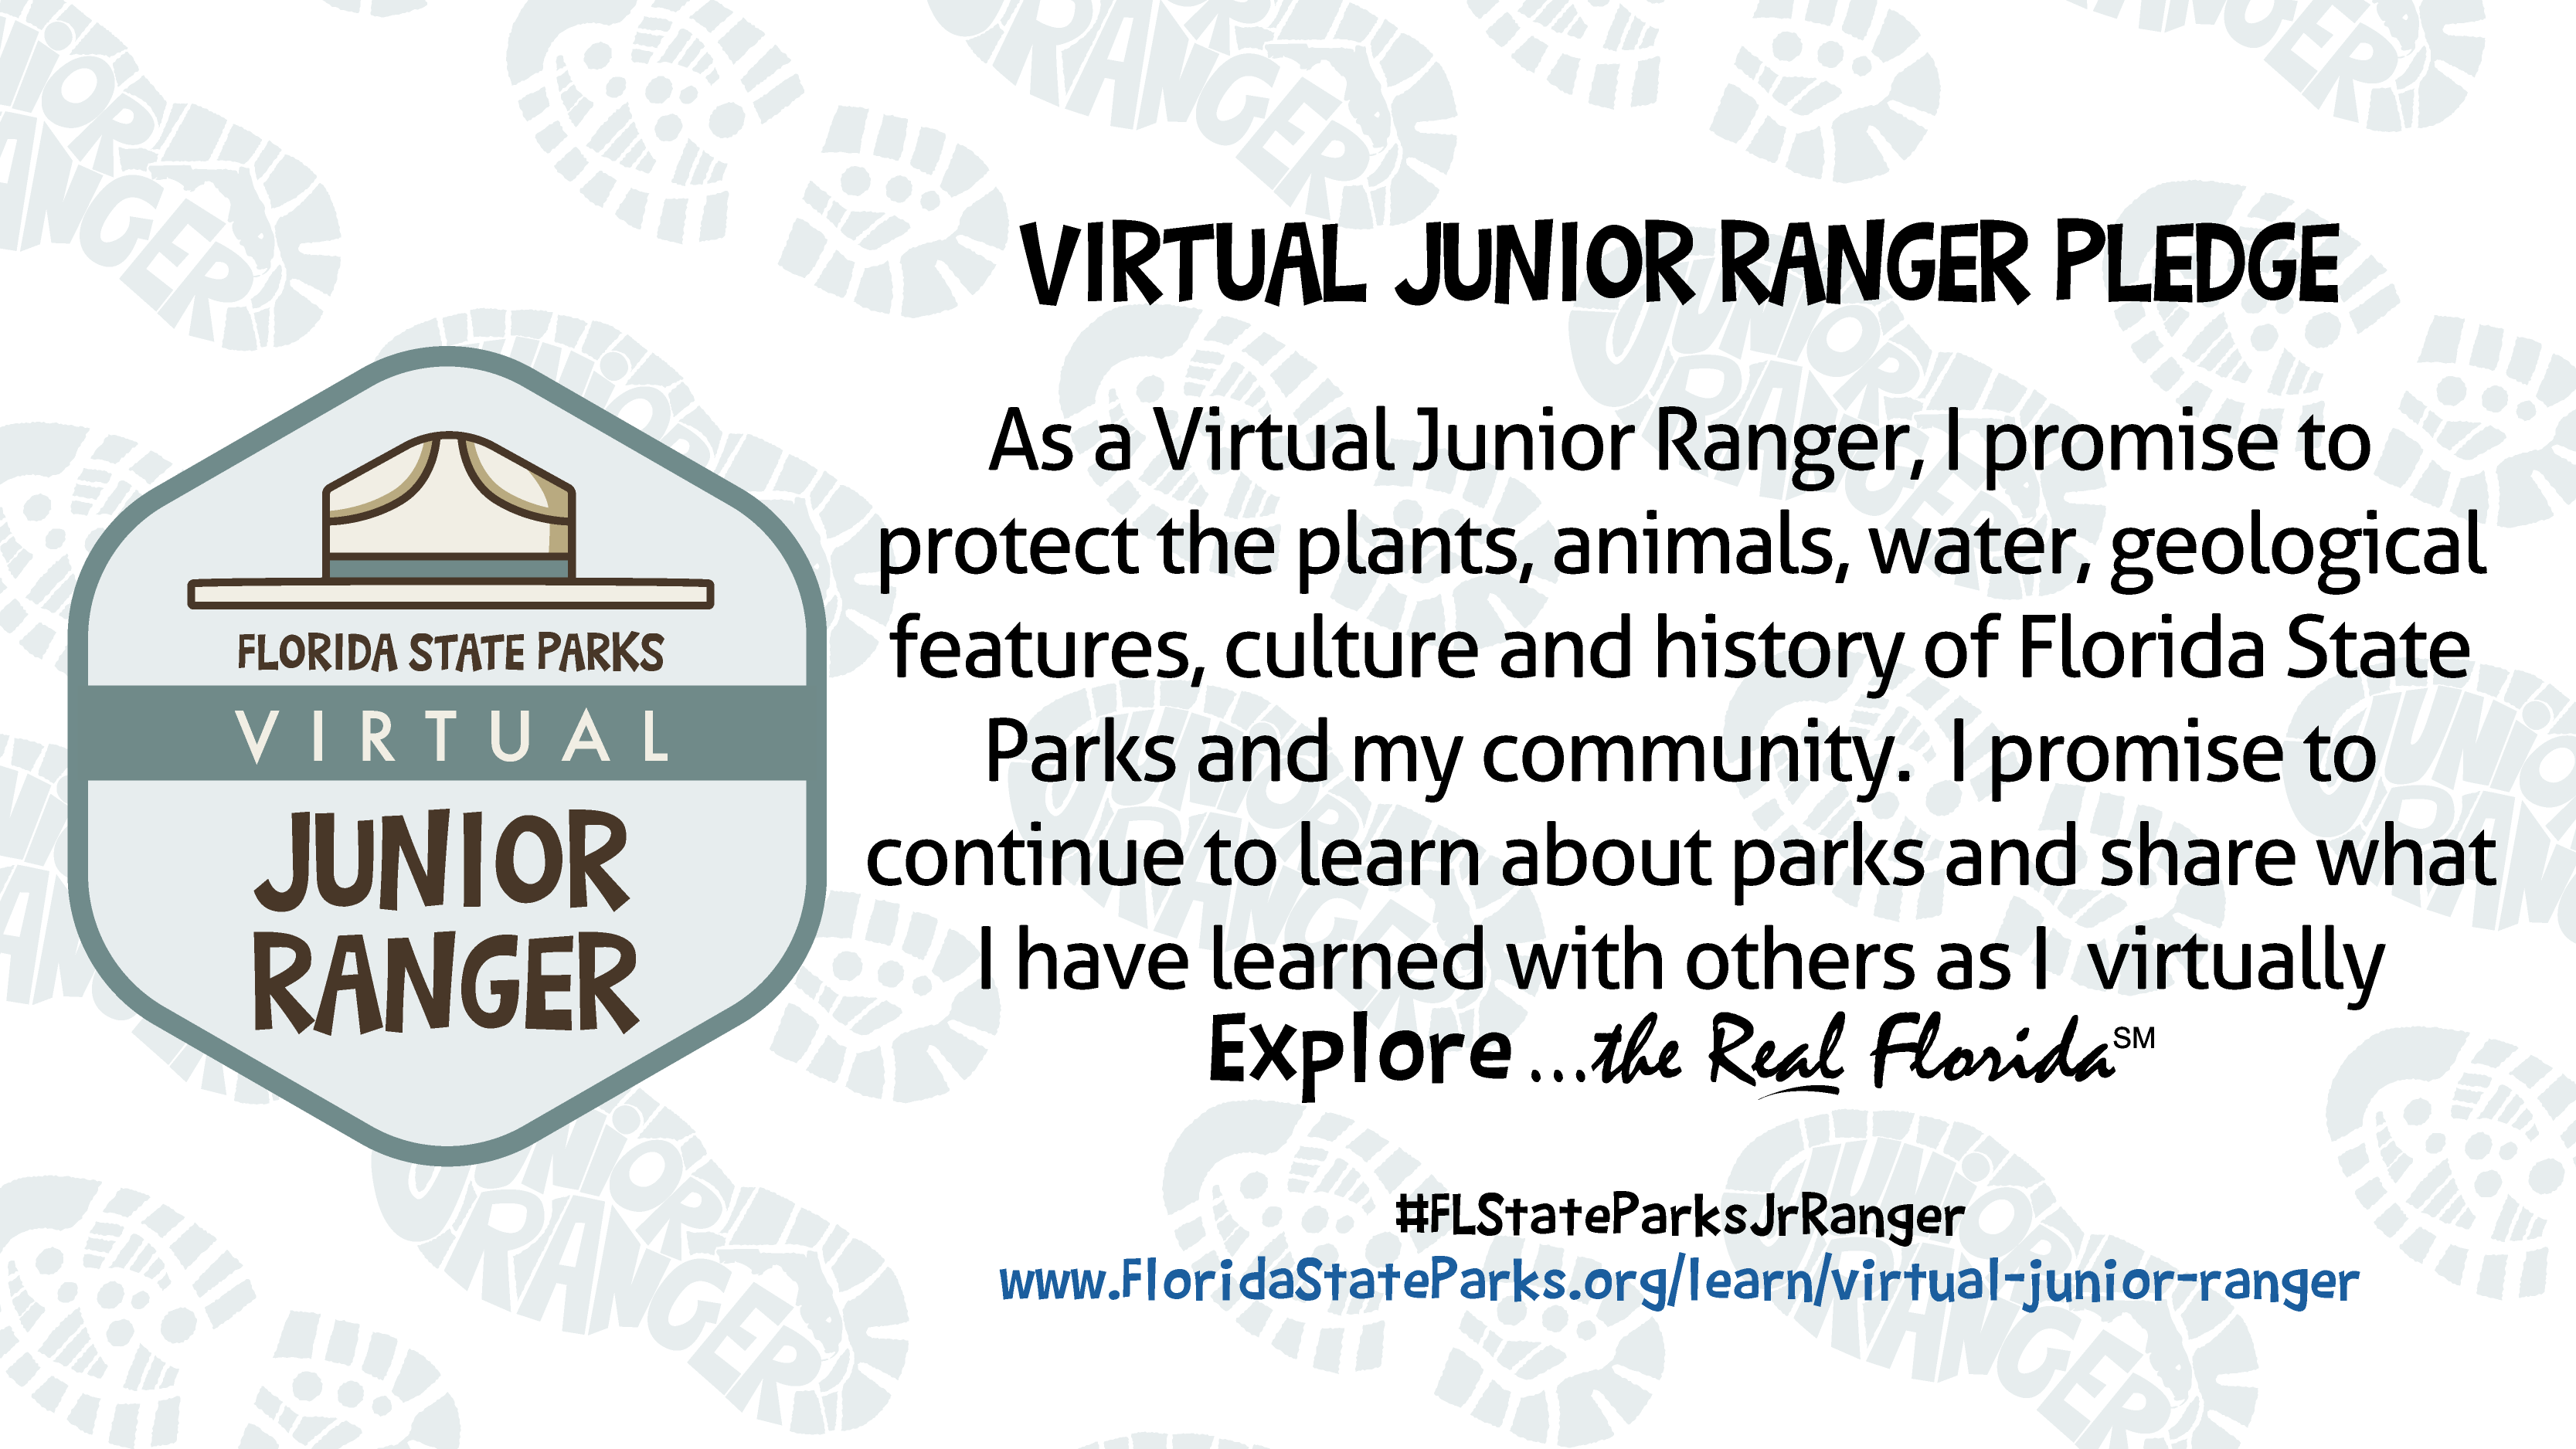 As a Virtual Junior Ranger, I promise to protect the plants, animals, water, geological features, culture and history of Florida State Parks and my community. I promise to continue to learn about parks and share what I have learned with others as I virtually explore the real Florida.